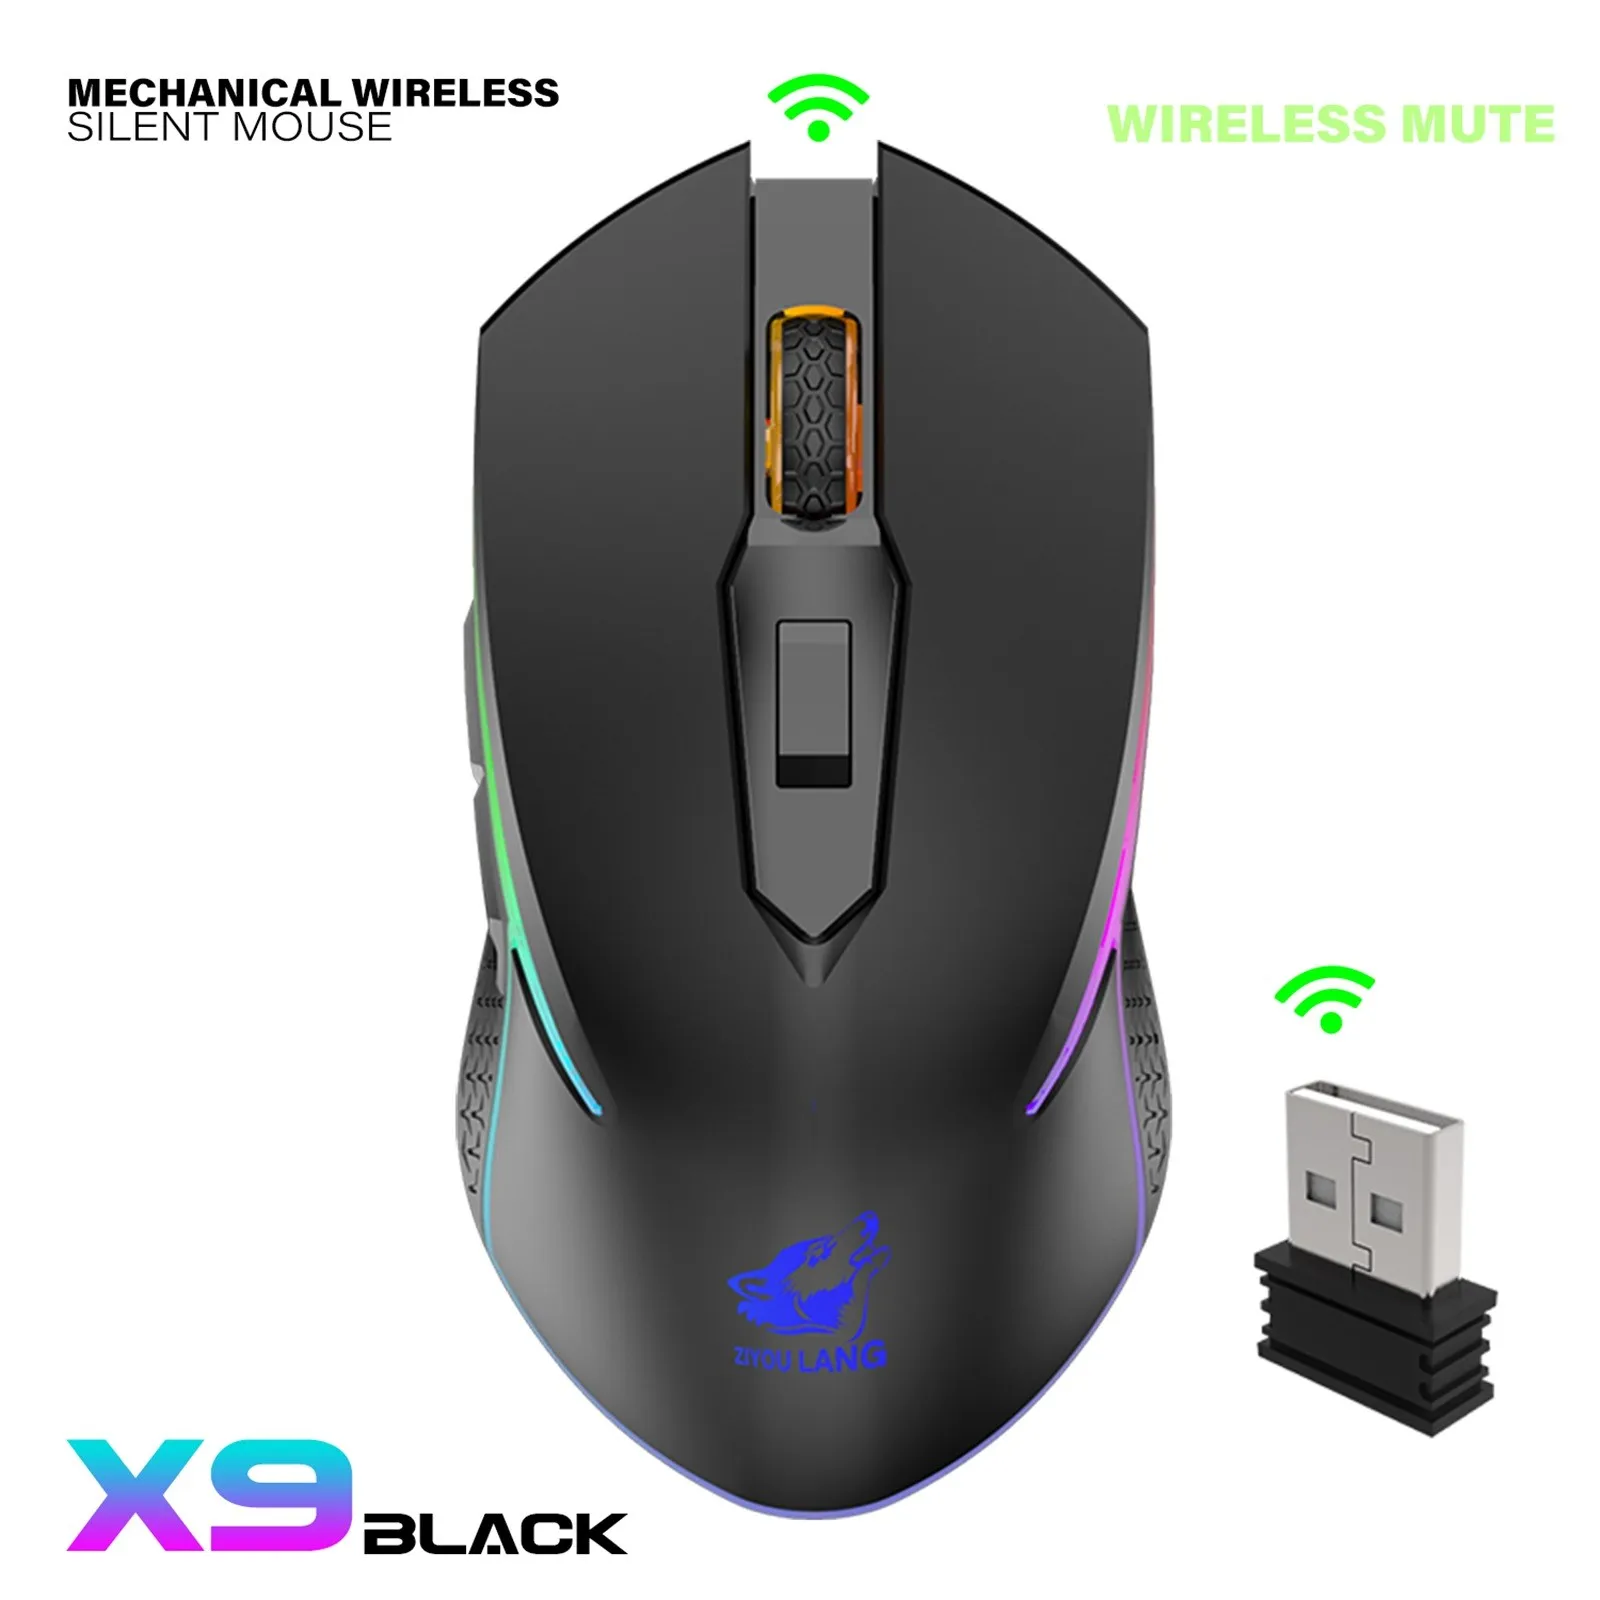 X9 Wireless RGB Luminous Mouse Rechargeable Silent Mechanical Mice 2400 DPI Adjustable Gaming Mouse Mice for PC Laptop Games best pc gaming mouse